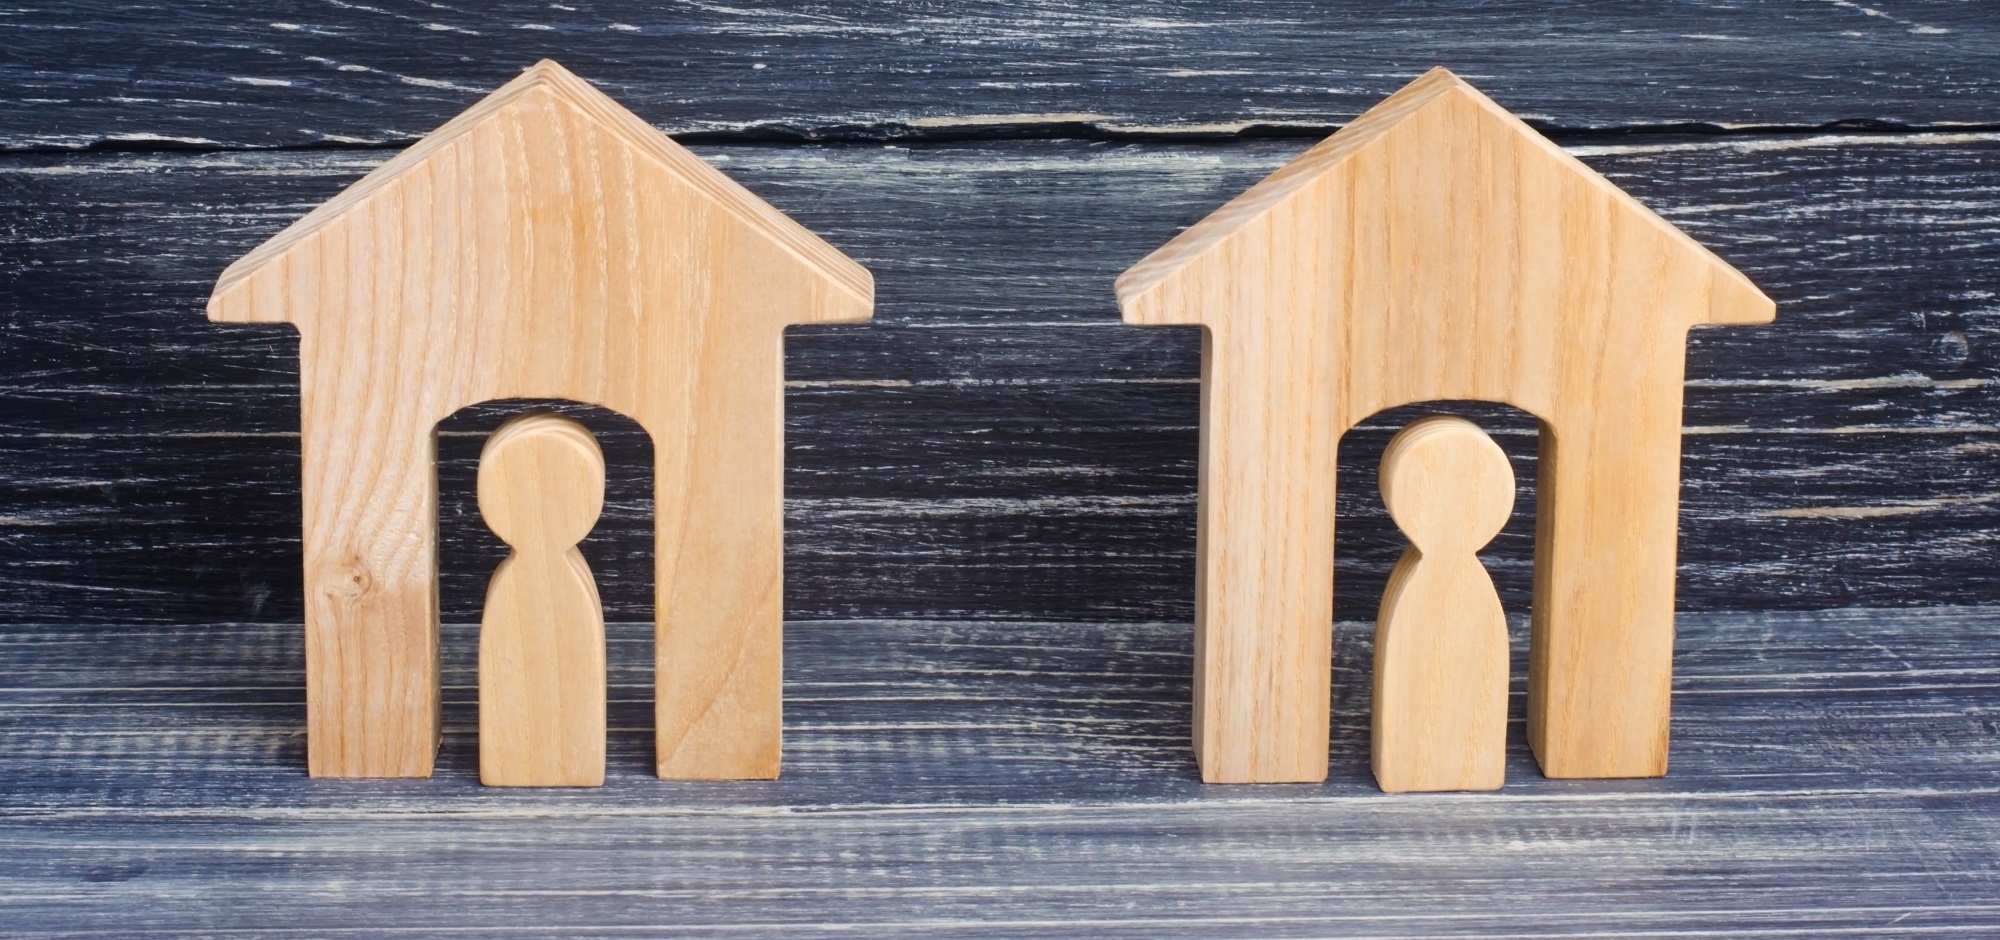 Your tenants, their neighbours and your role as a landlord